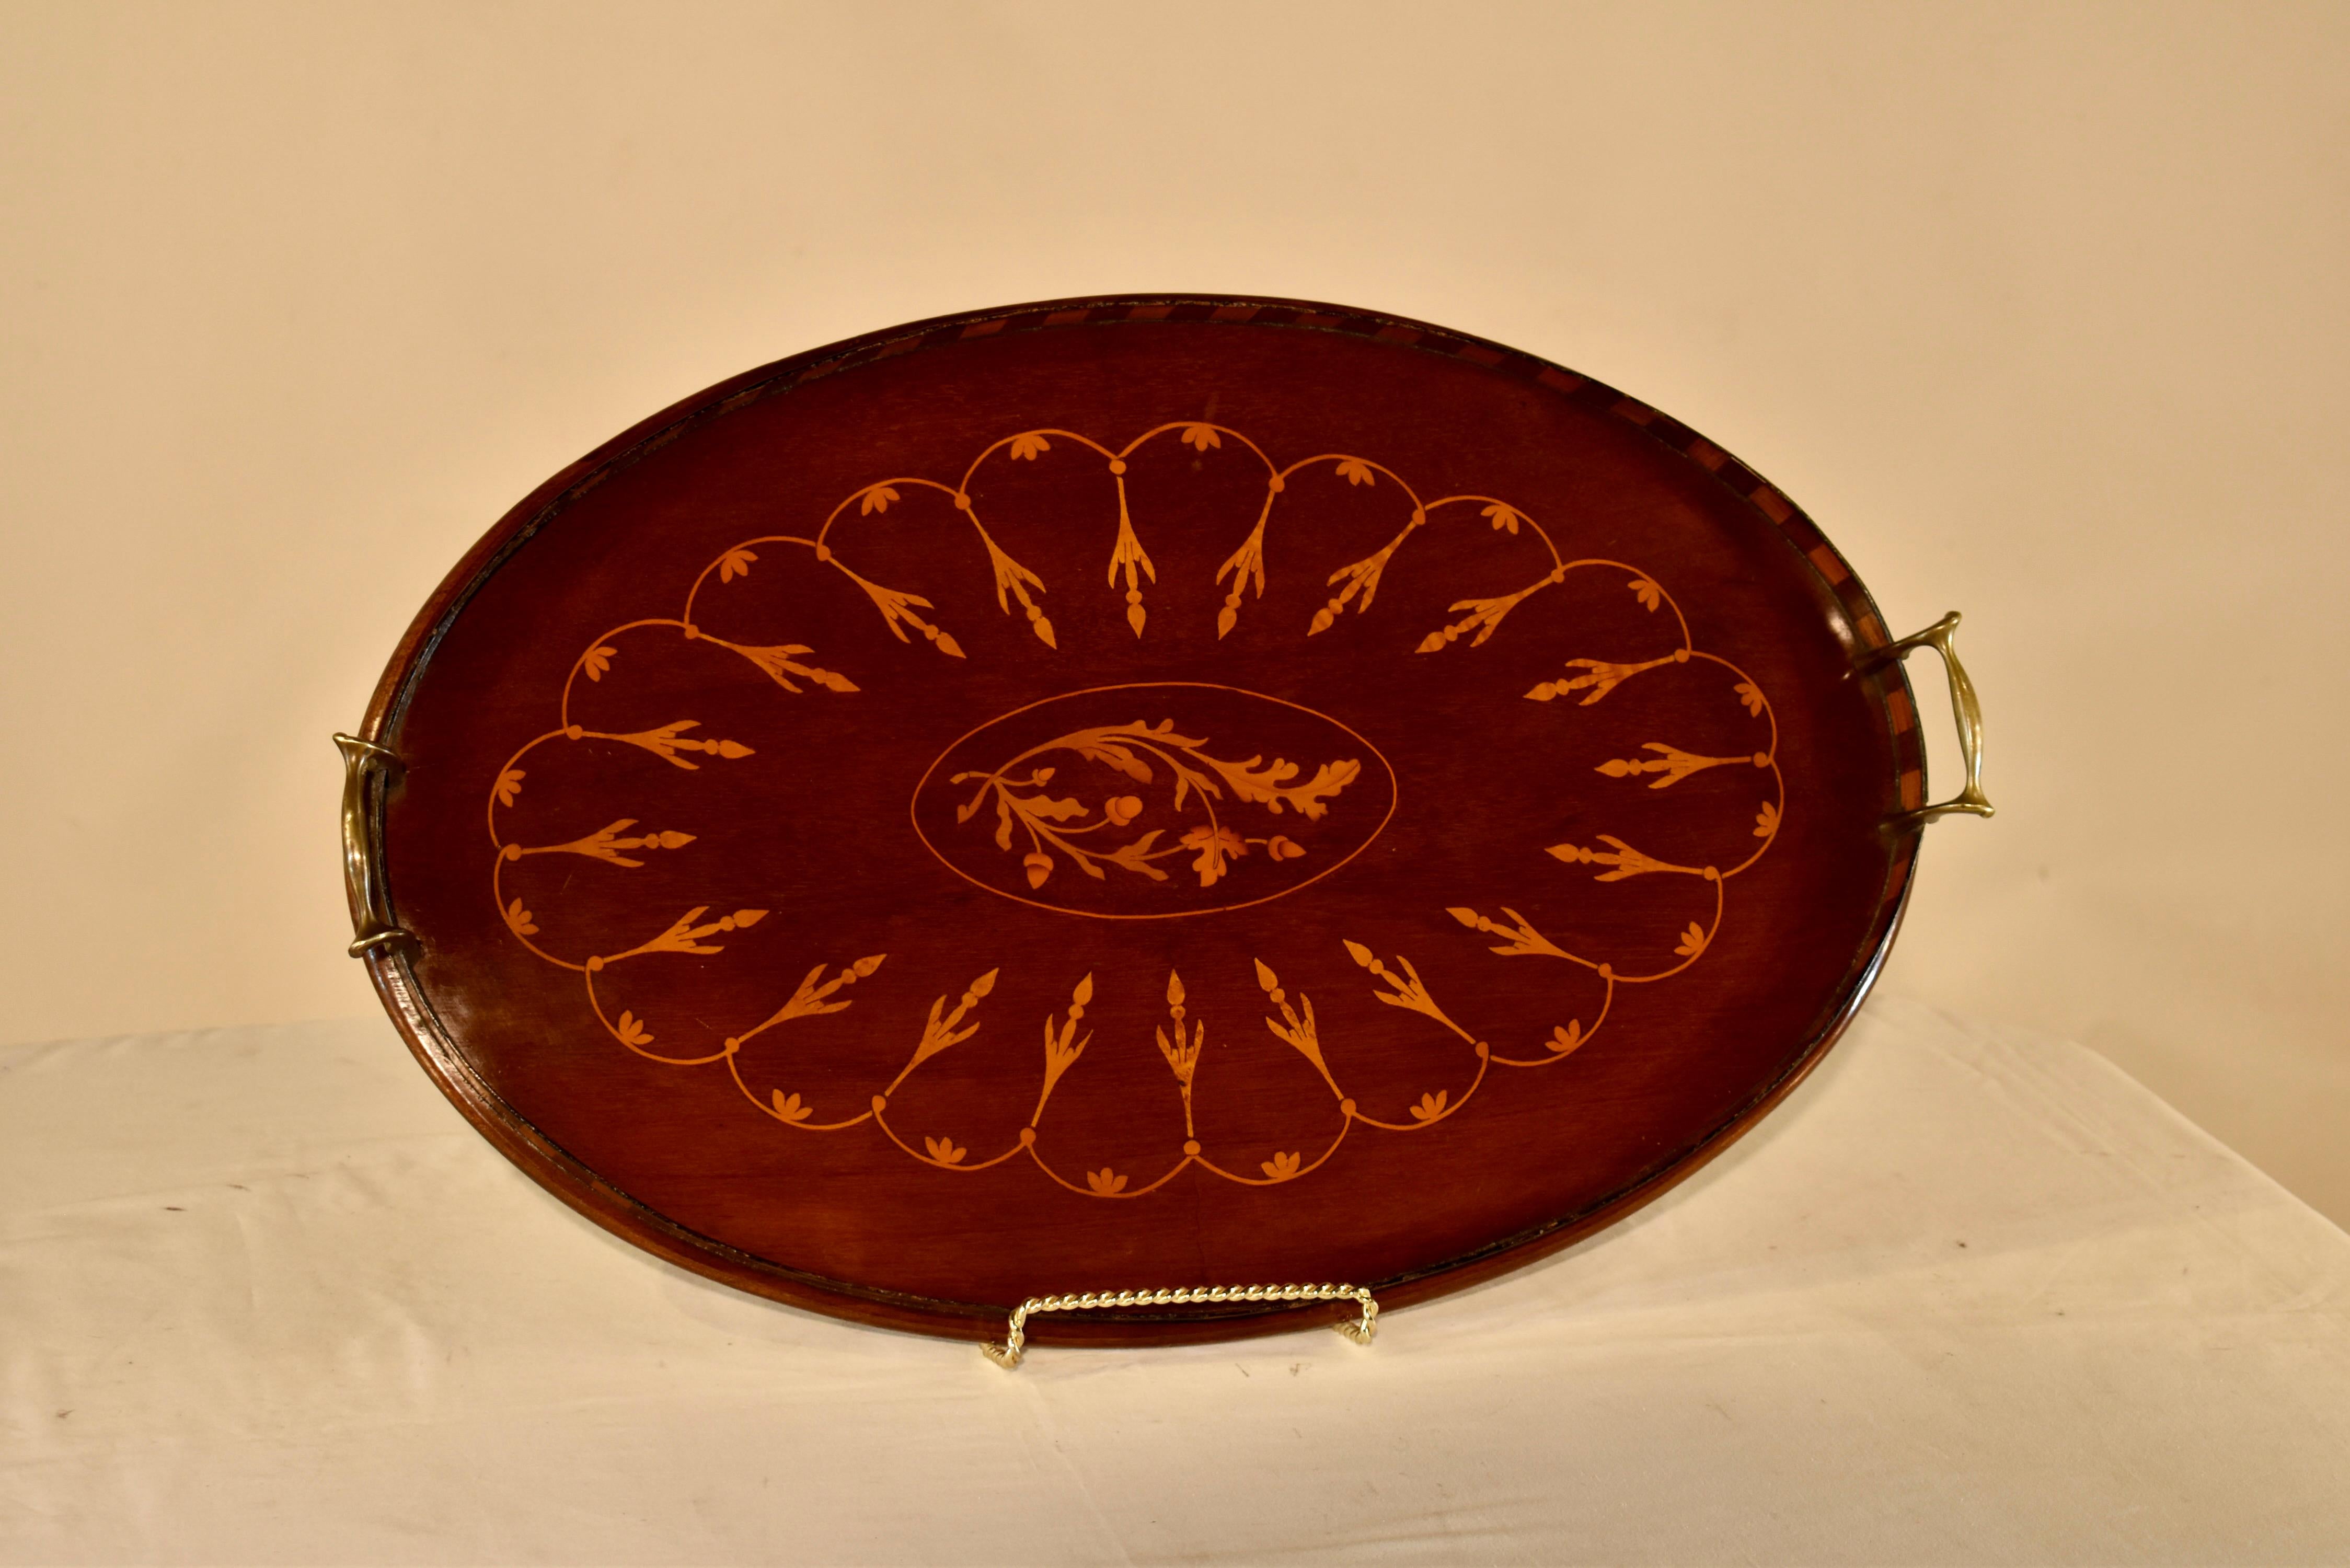 19th century mahogany tray from England inlaid in a lovely pattern with leaves and acorns.. Around the central lozenge of leaves and acorns, there is a scalloped pattern which borders the tray for added design interest.  The tray has a two toned